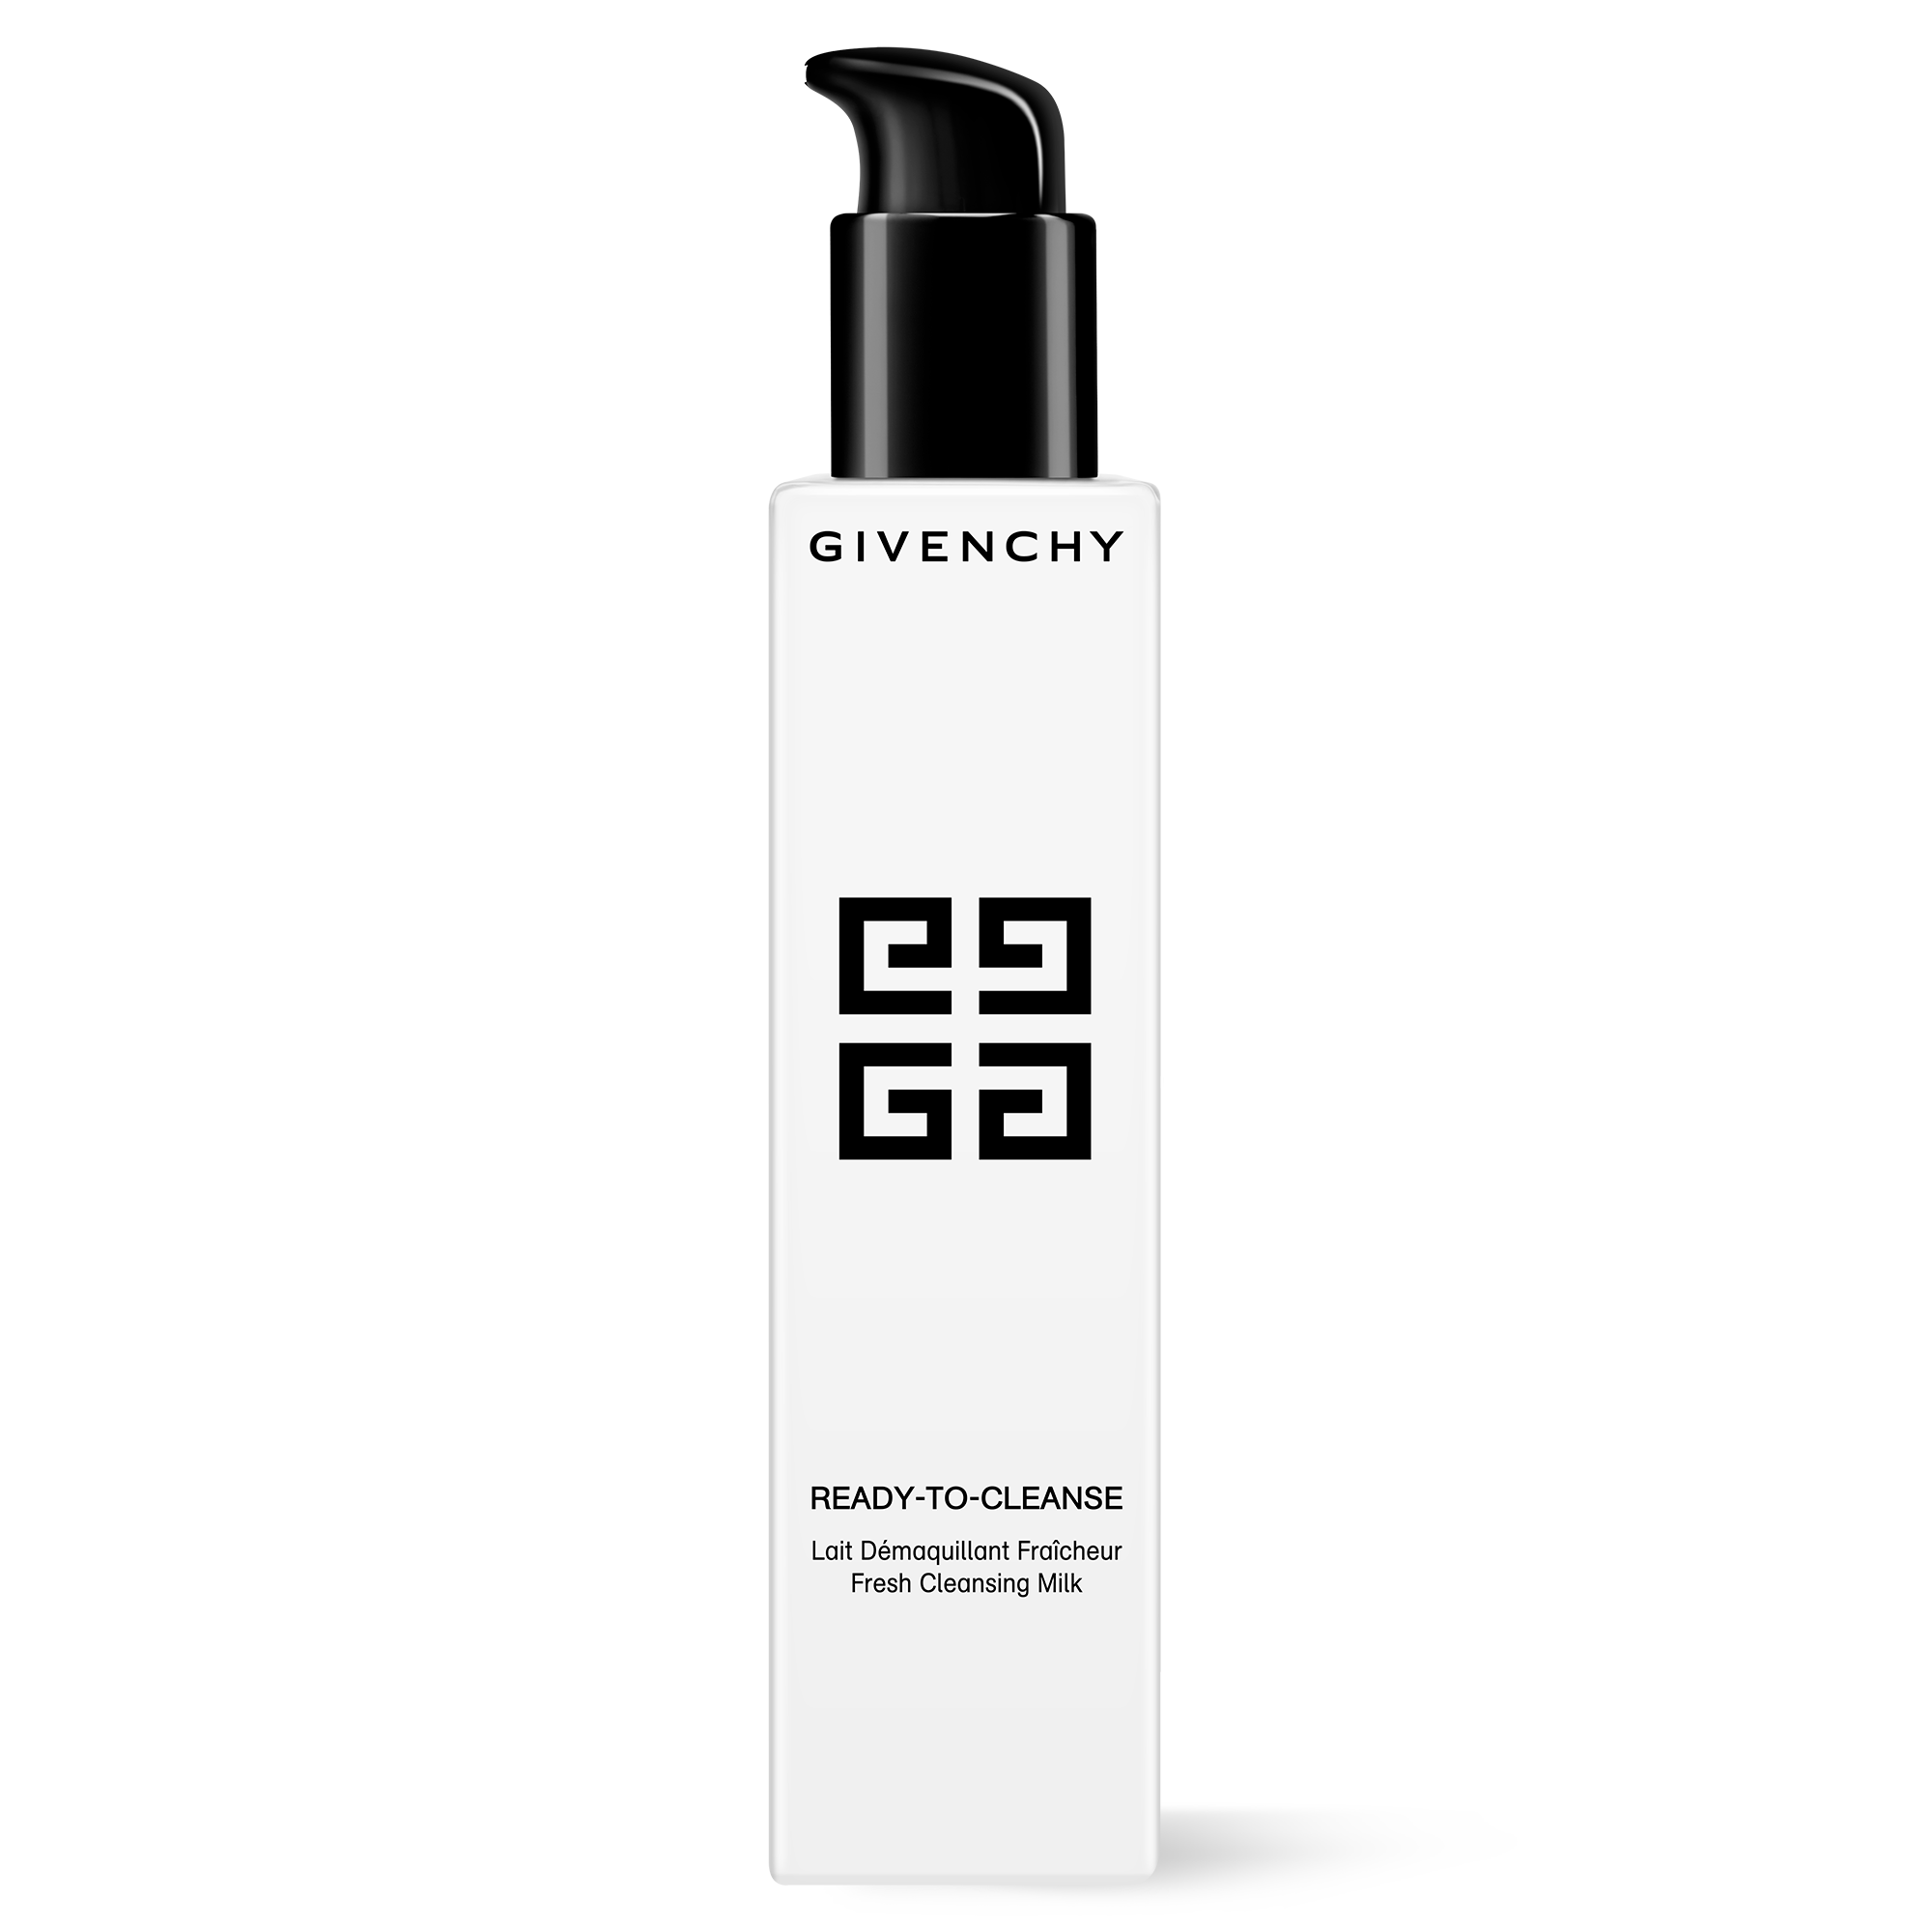 givenchy cleansing milk